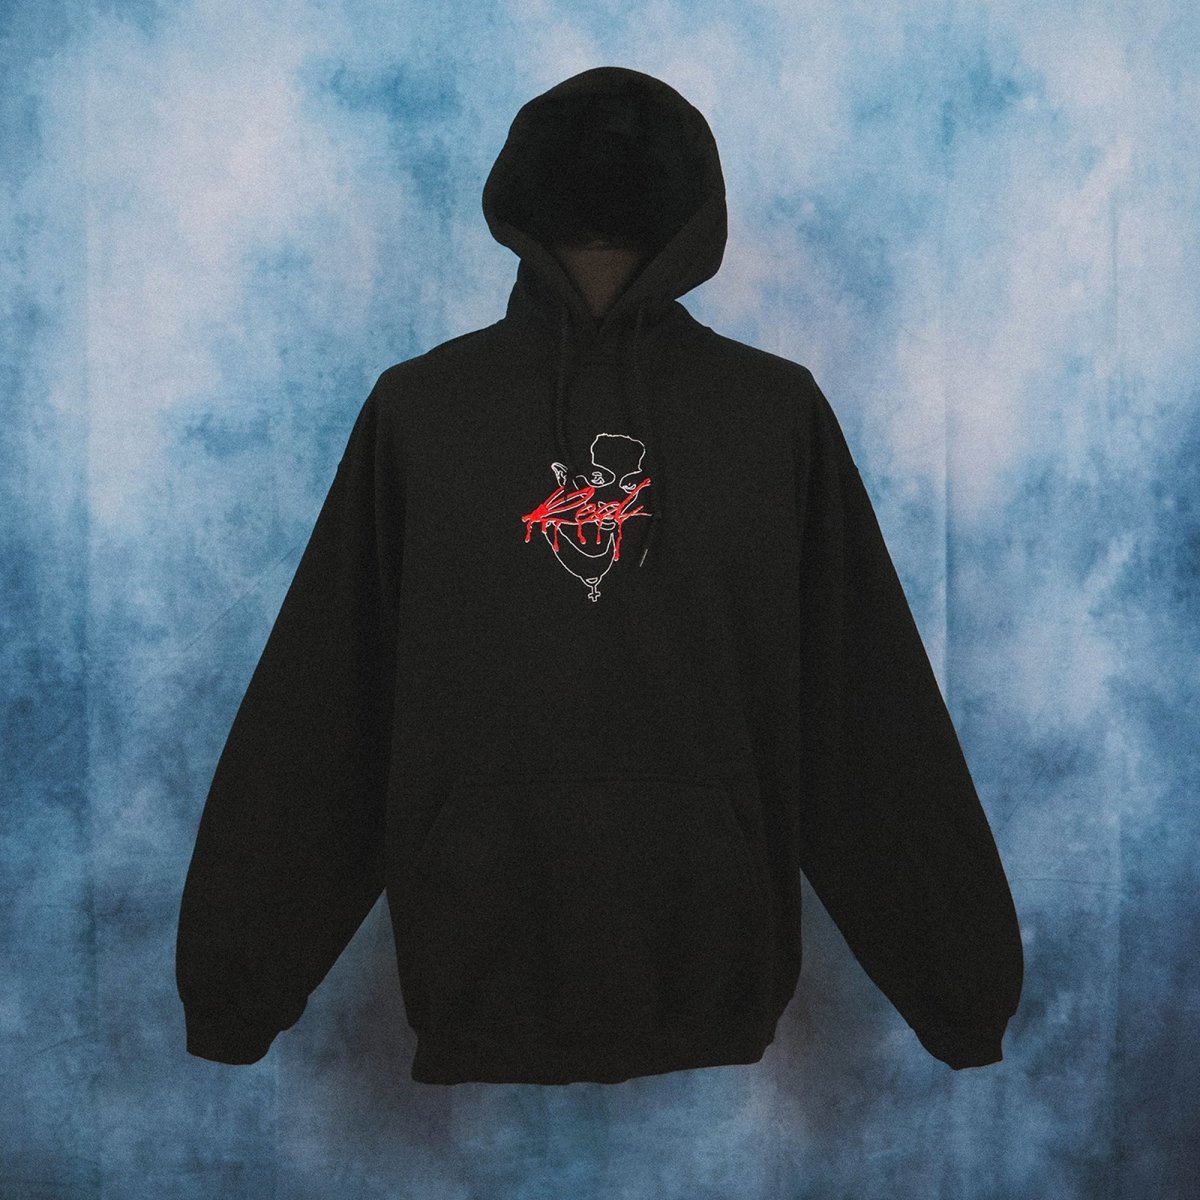 Playboi Carti - Whole Lotta Red Outline Unisex Embroidered Hoodie